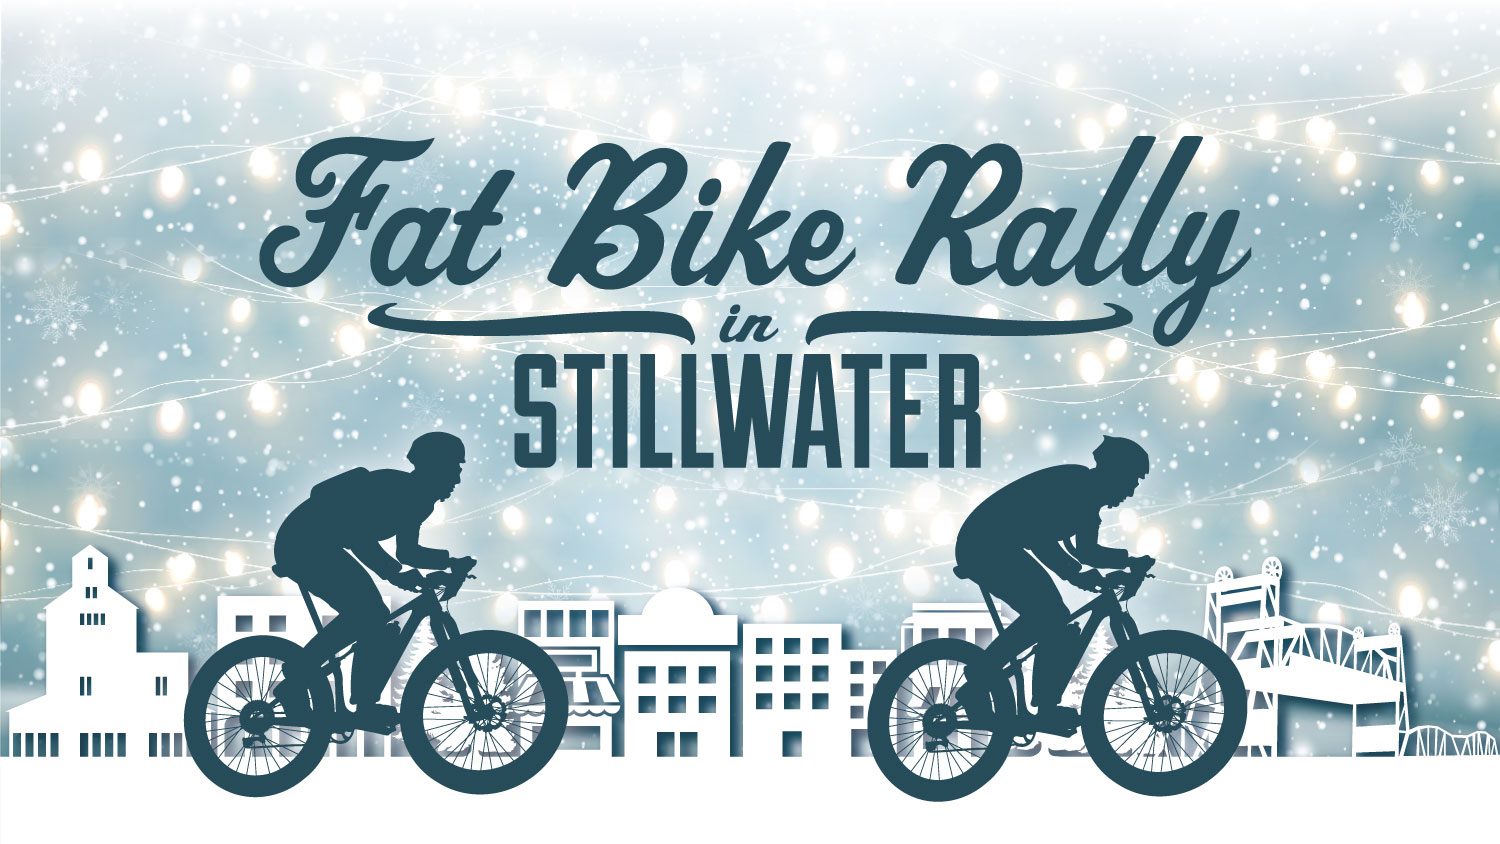 Stillwater “Fat Bike Rally” will offer competition on St. Croix Loop Trail